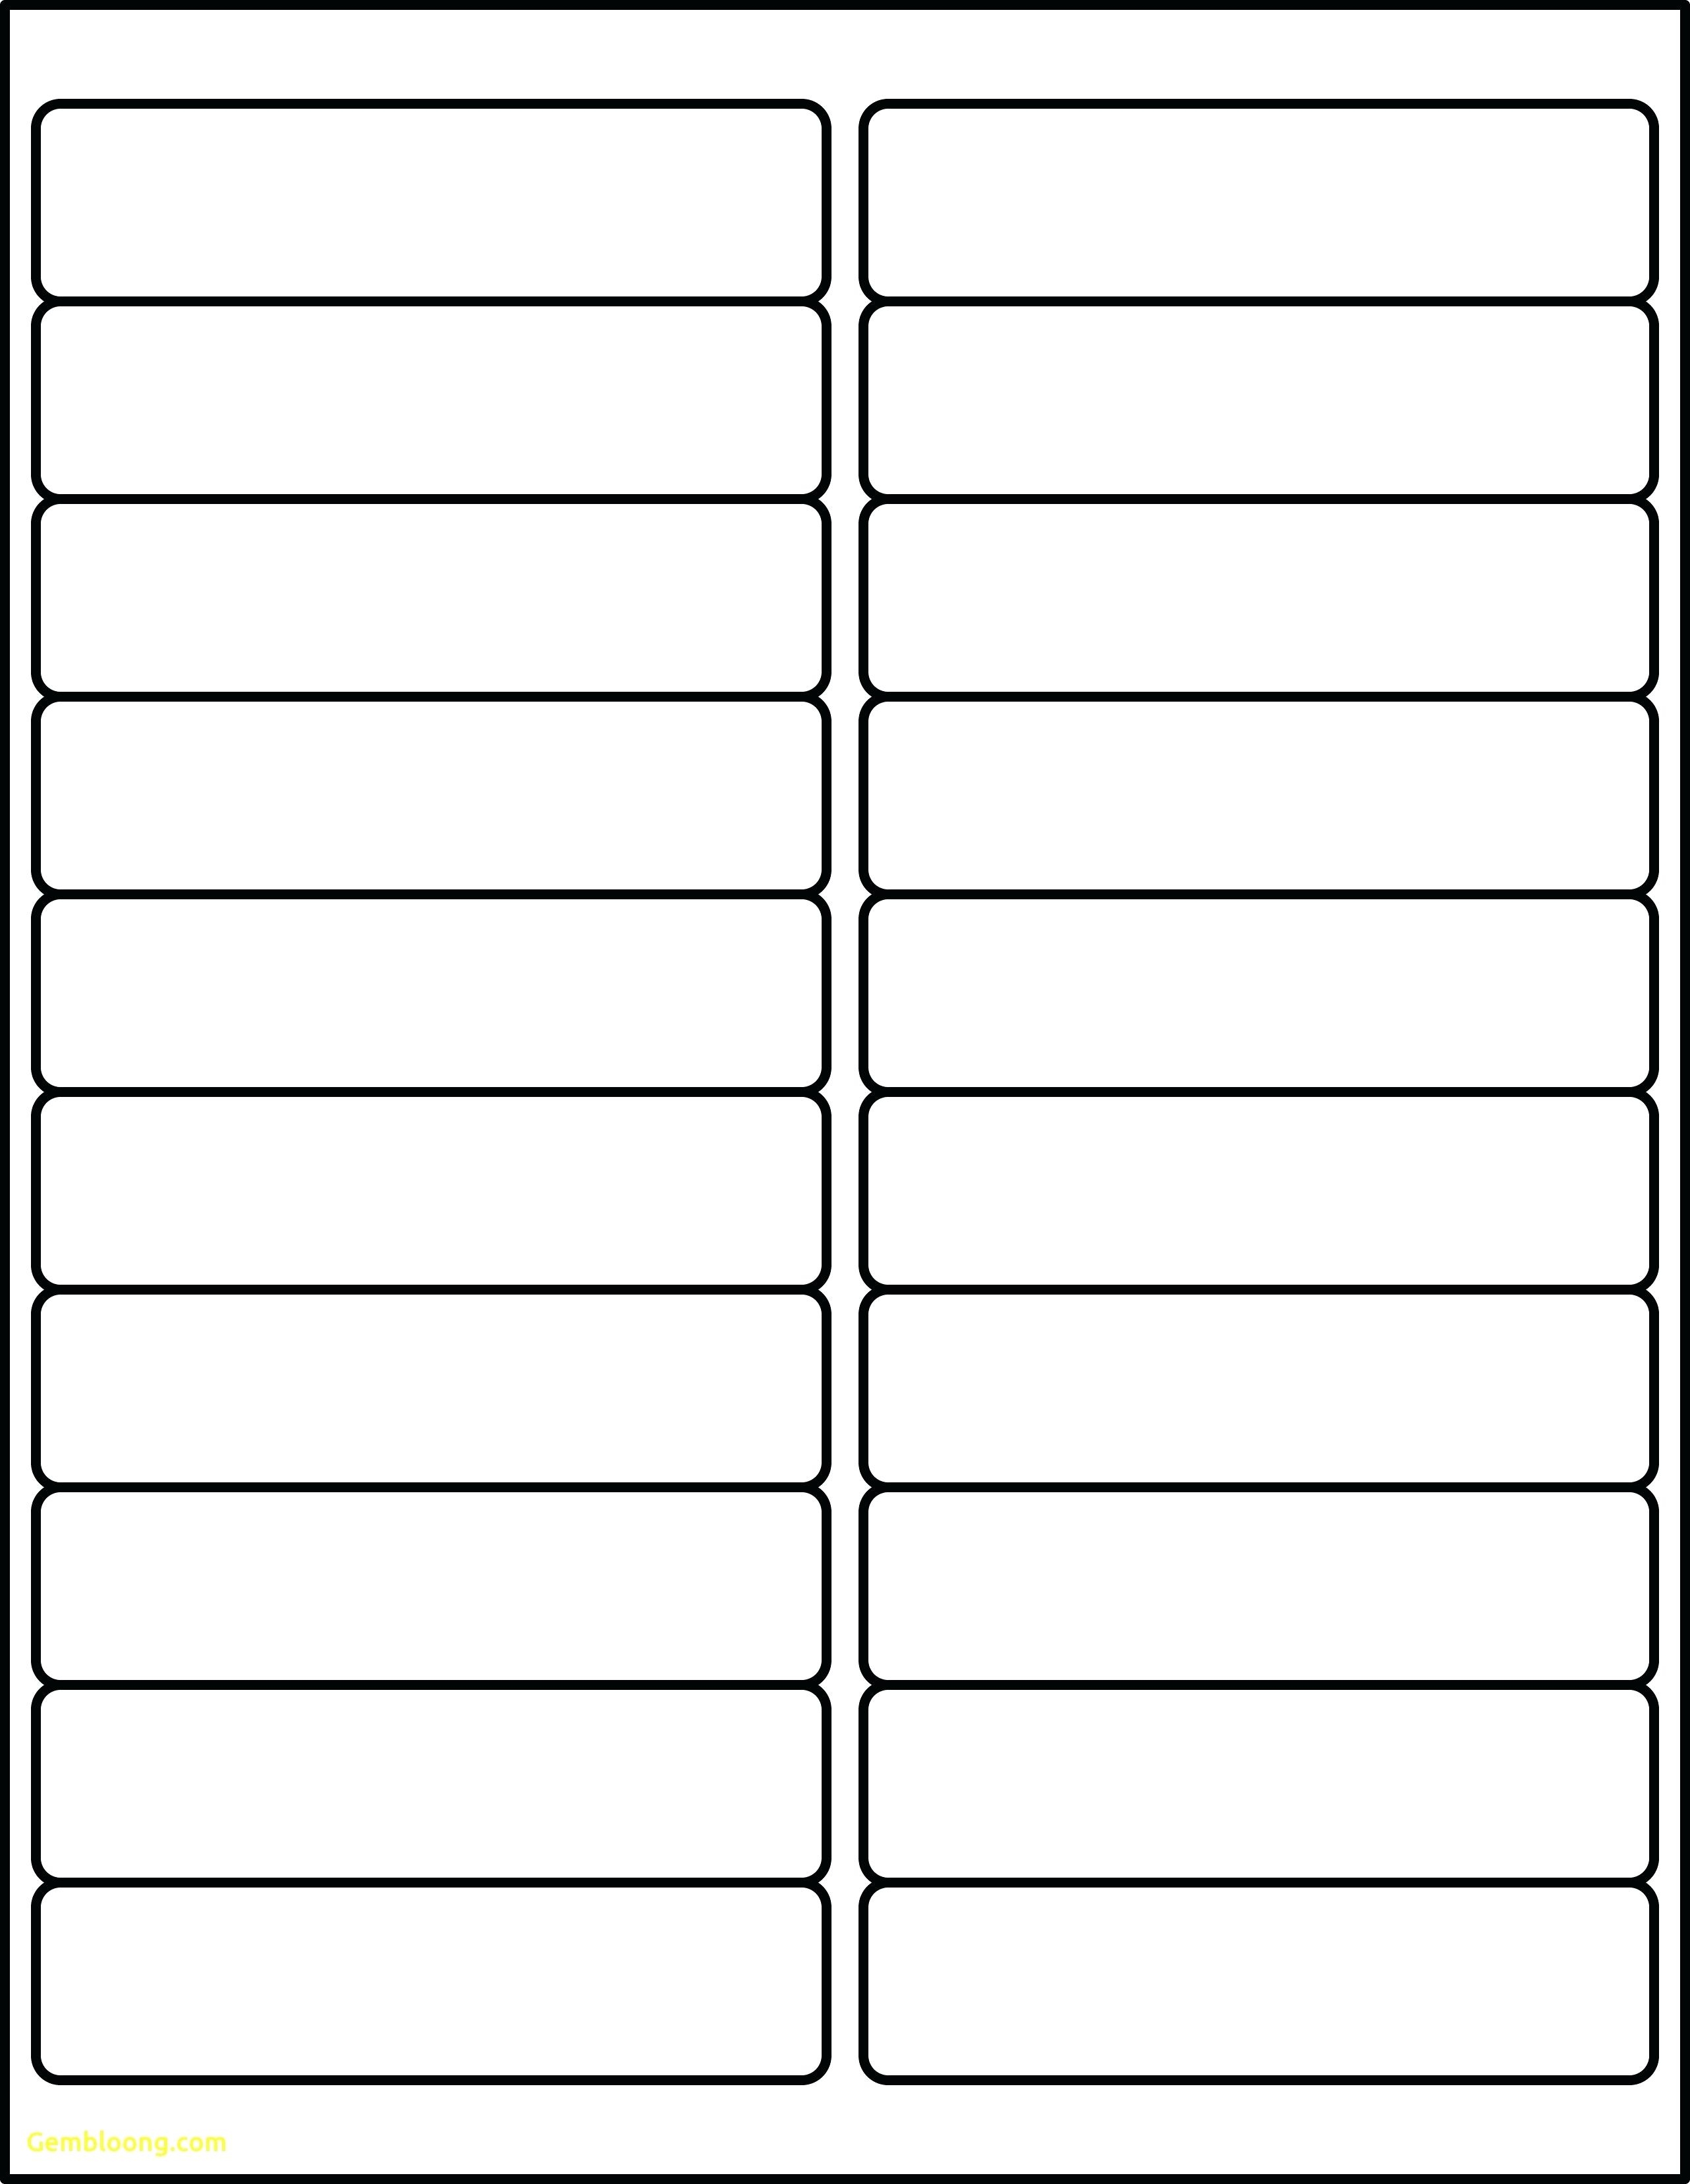 avery-labels-5160-template-blank-qualads